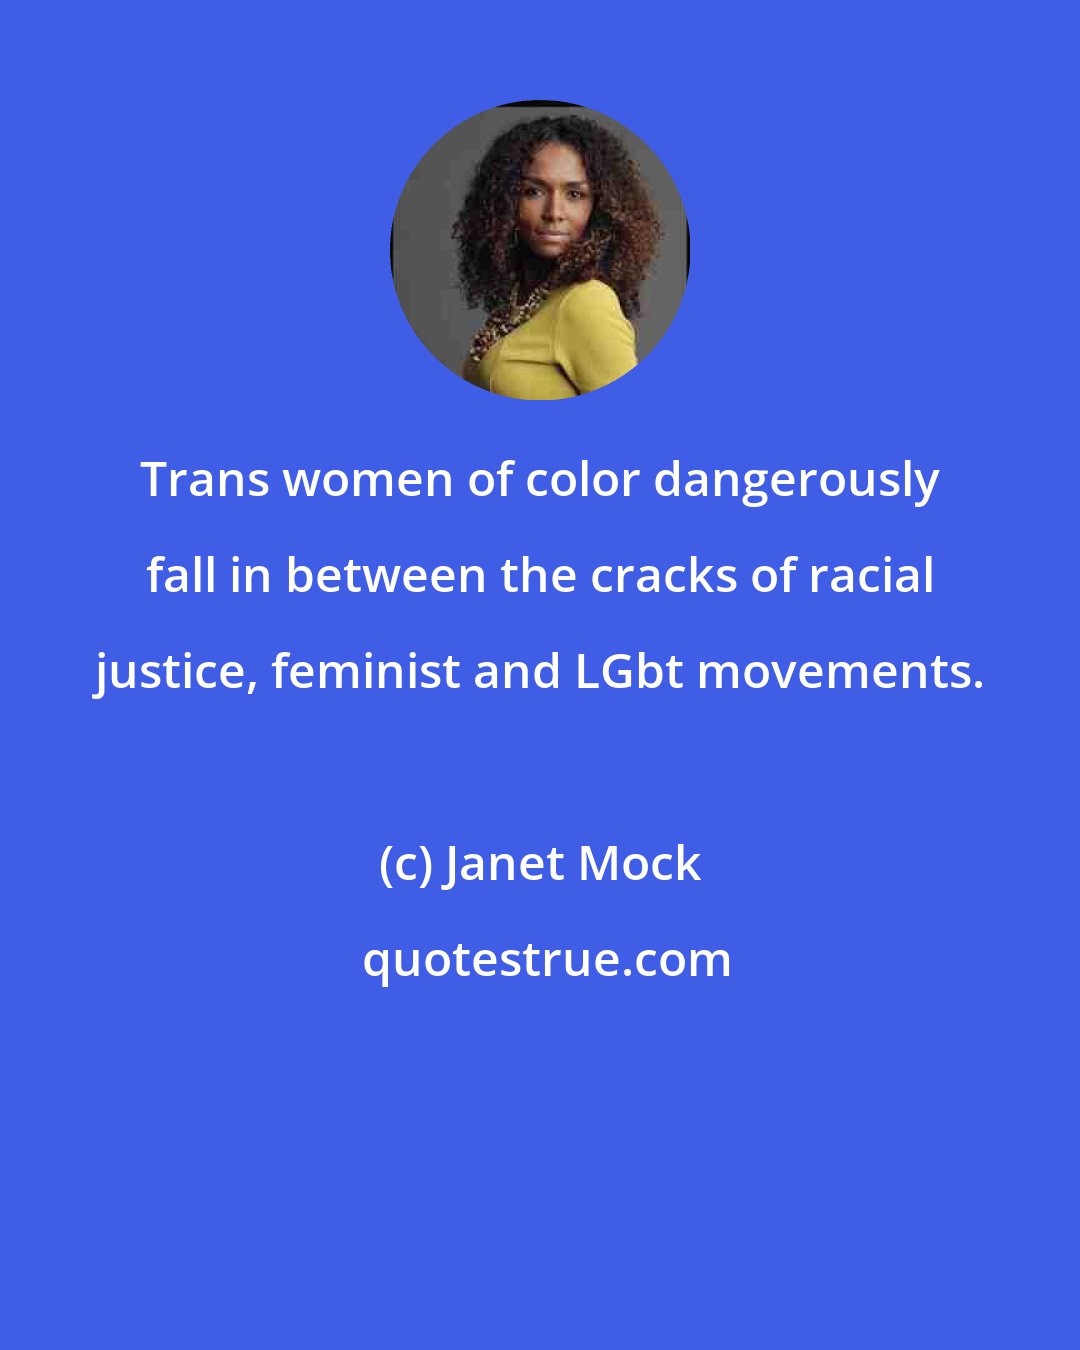 Janet Mock: Trans women of color dangerously fall in between the cracks of racial justice, feminist and LGbt movements.